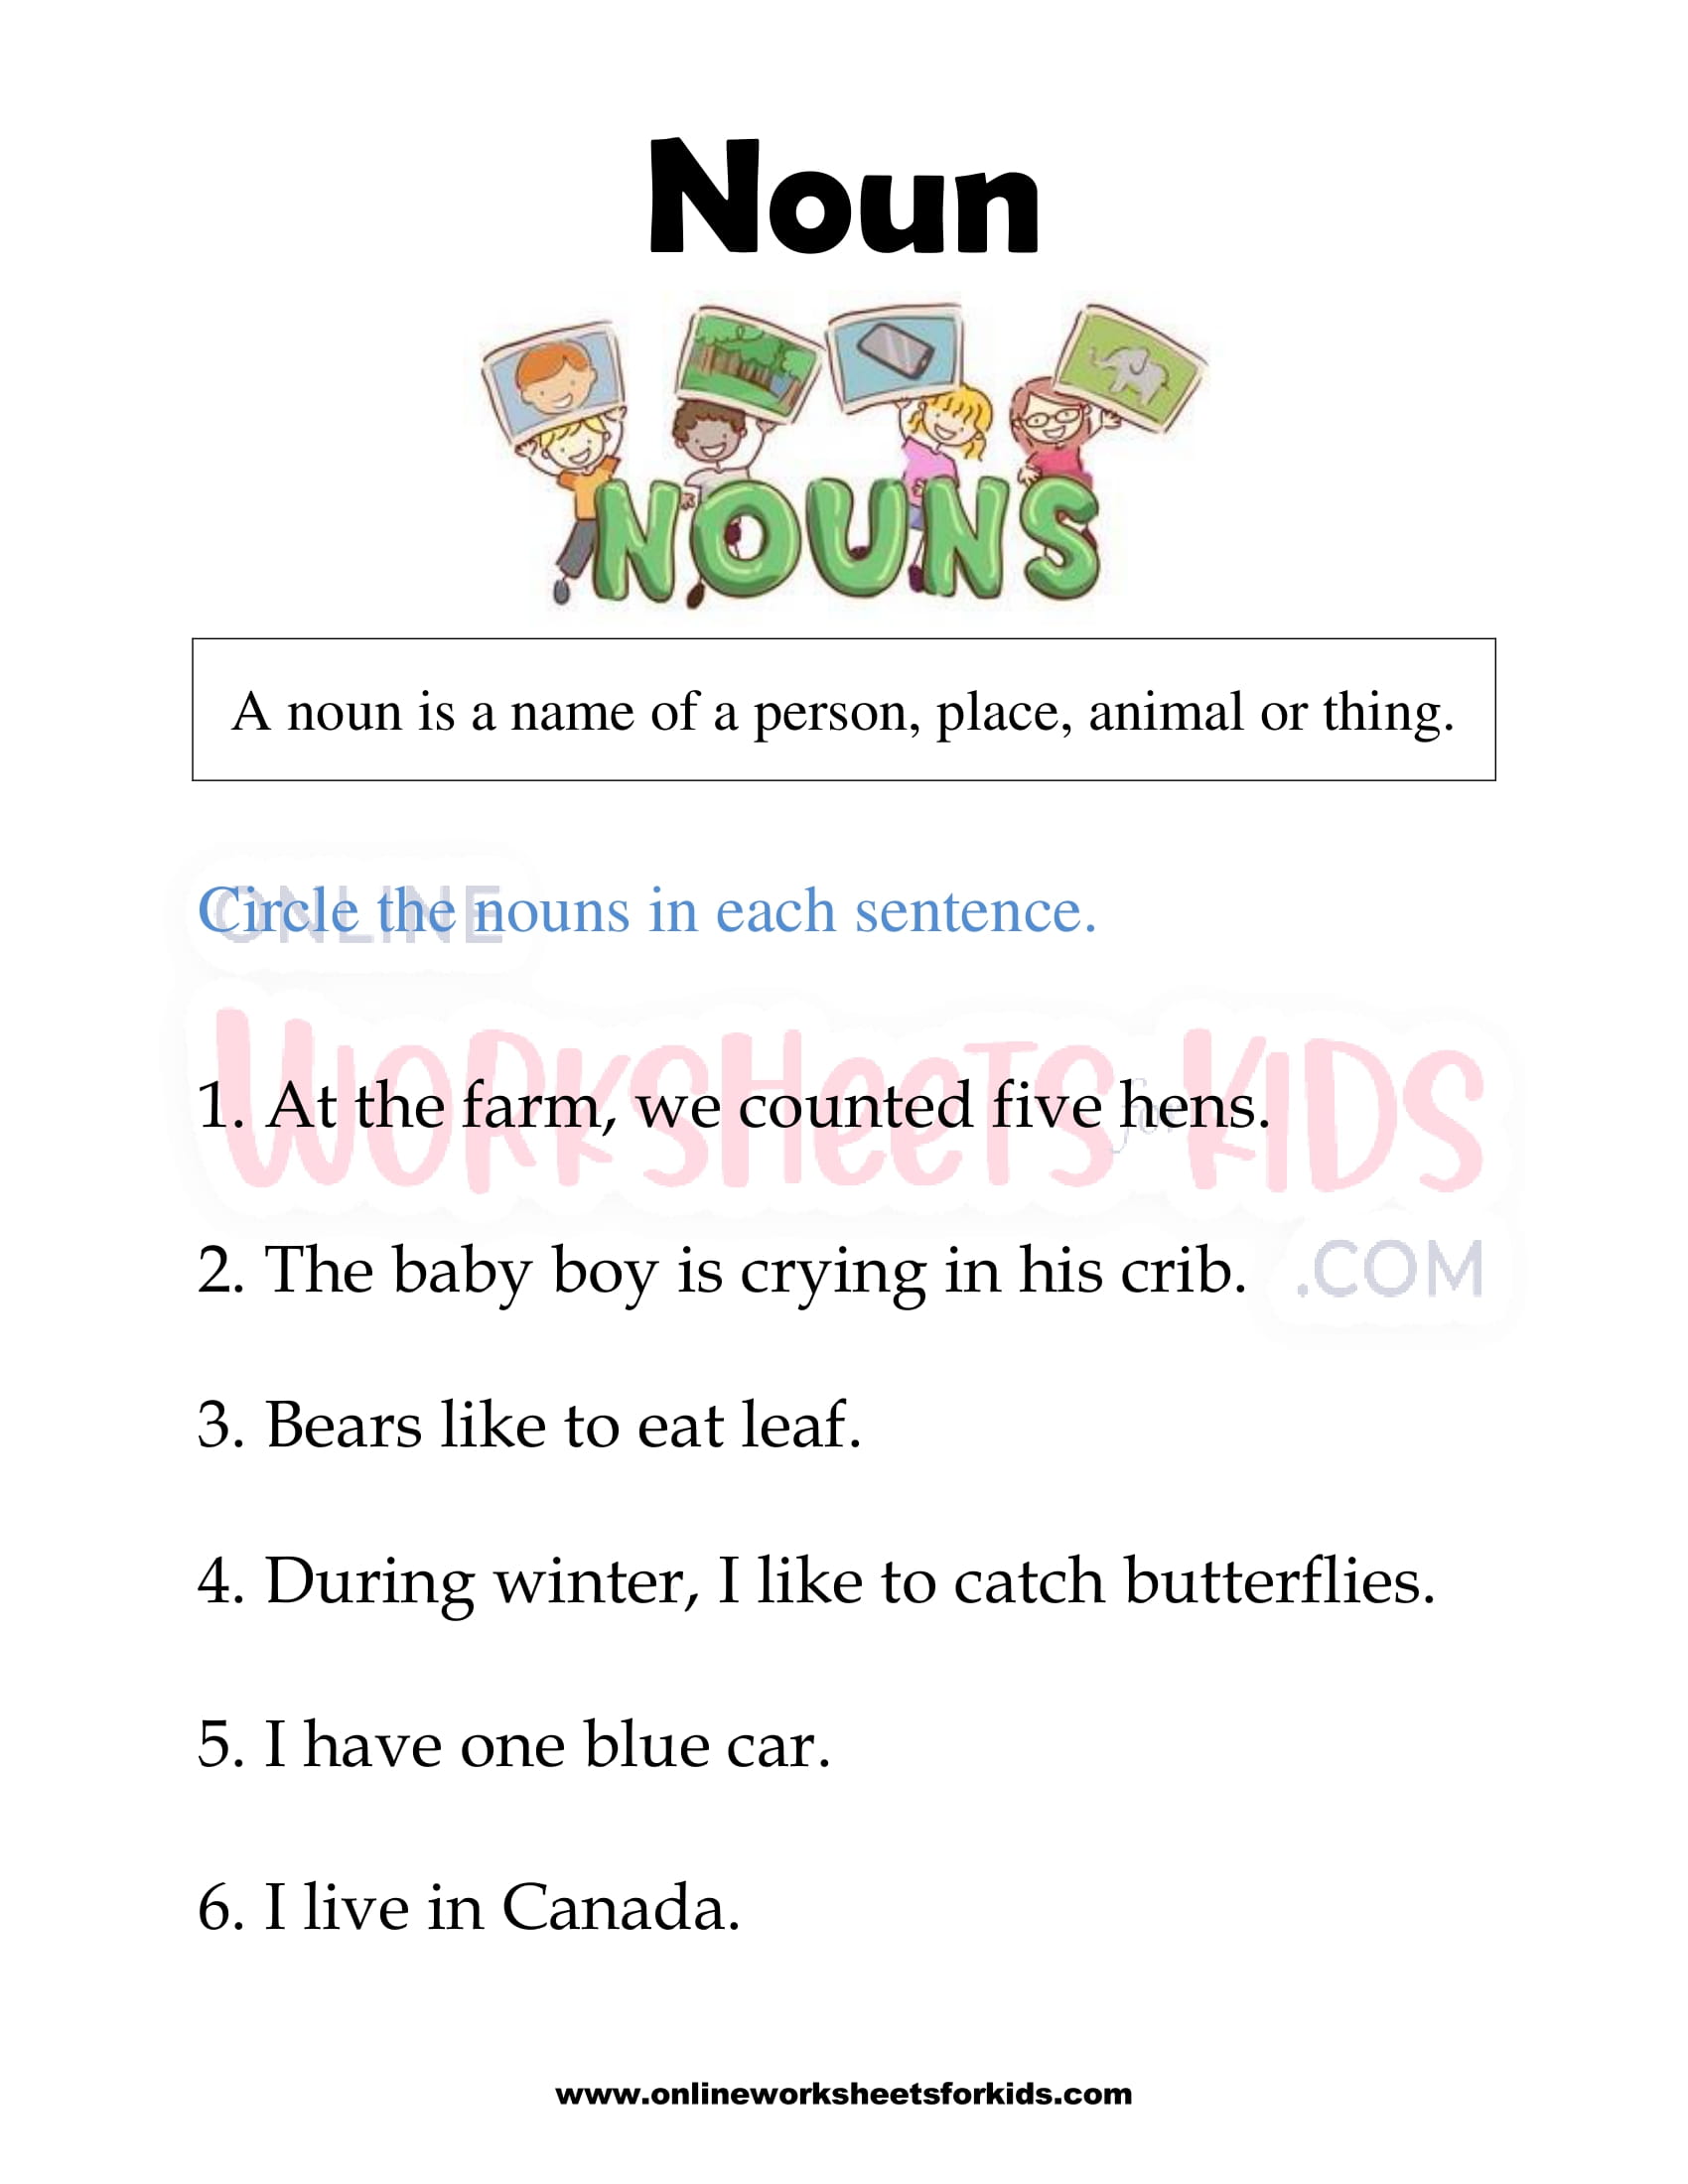 nouns-as-a-person-place-or-thing-worksheets-k5-learning-noun-verb